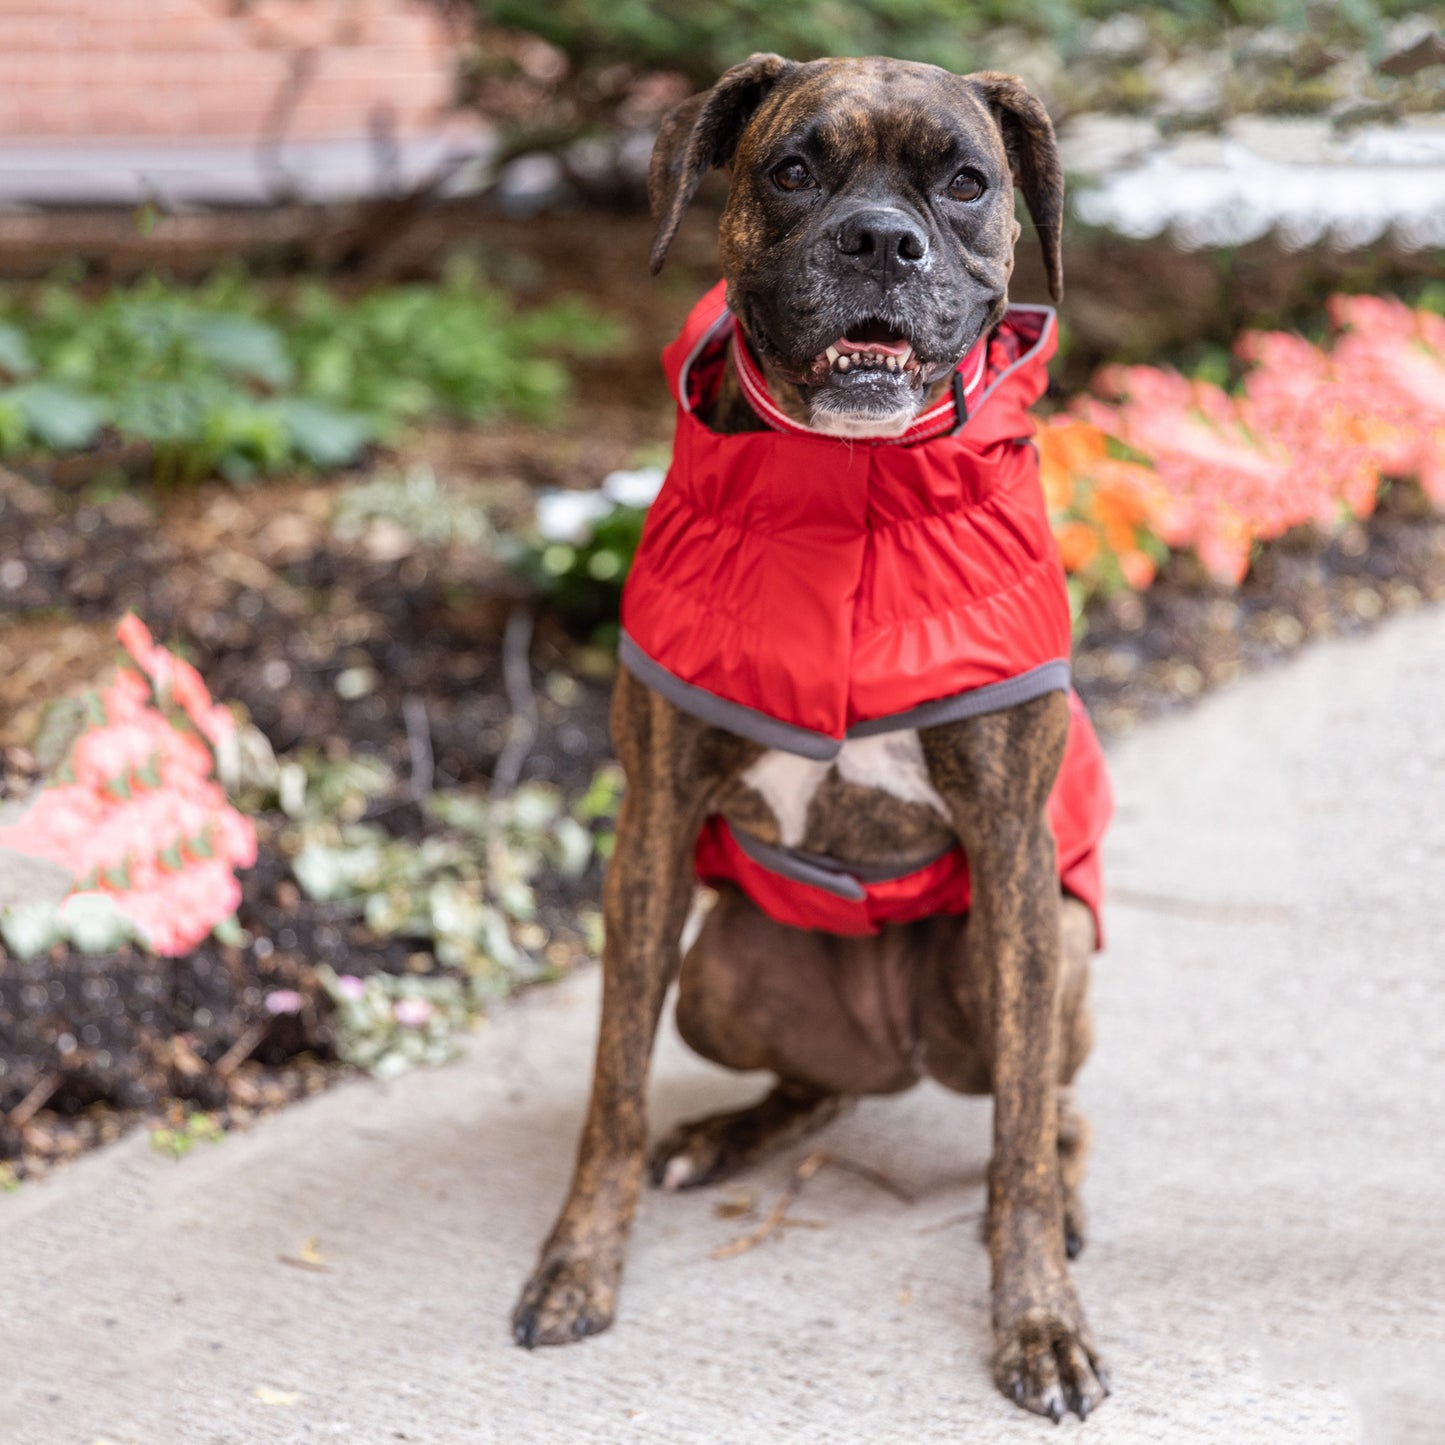 A brown and black brindle boxer seated on a sidewalk, wearing a red raincoat